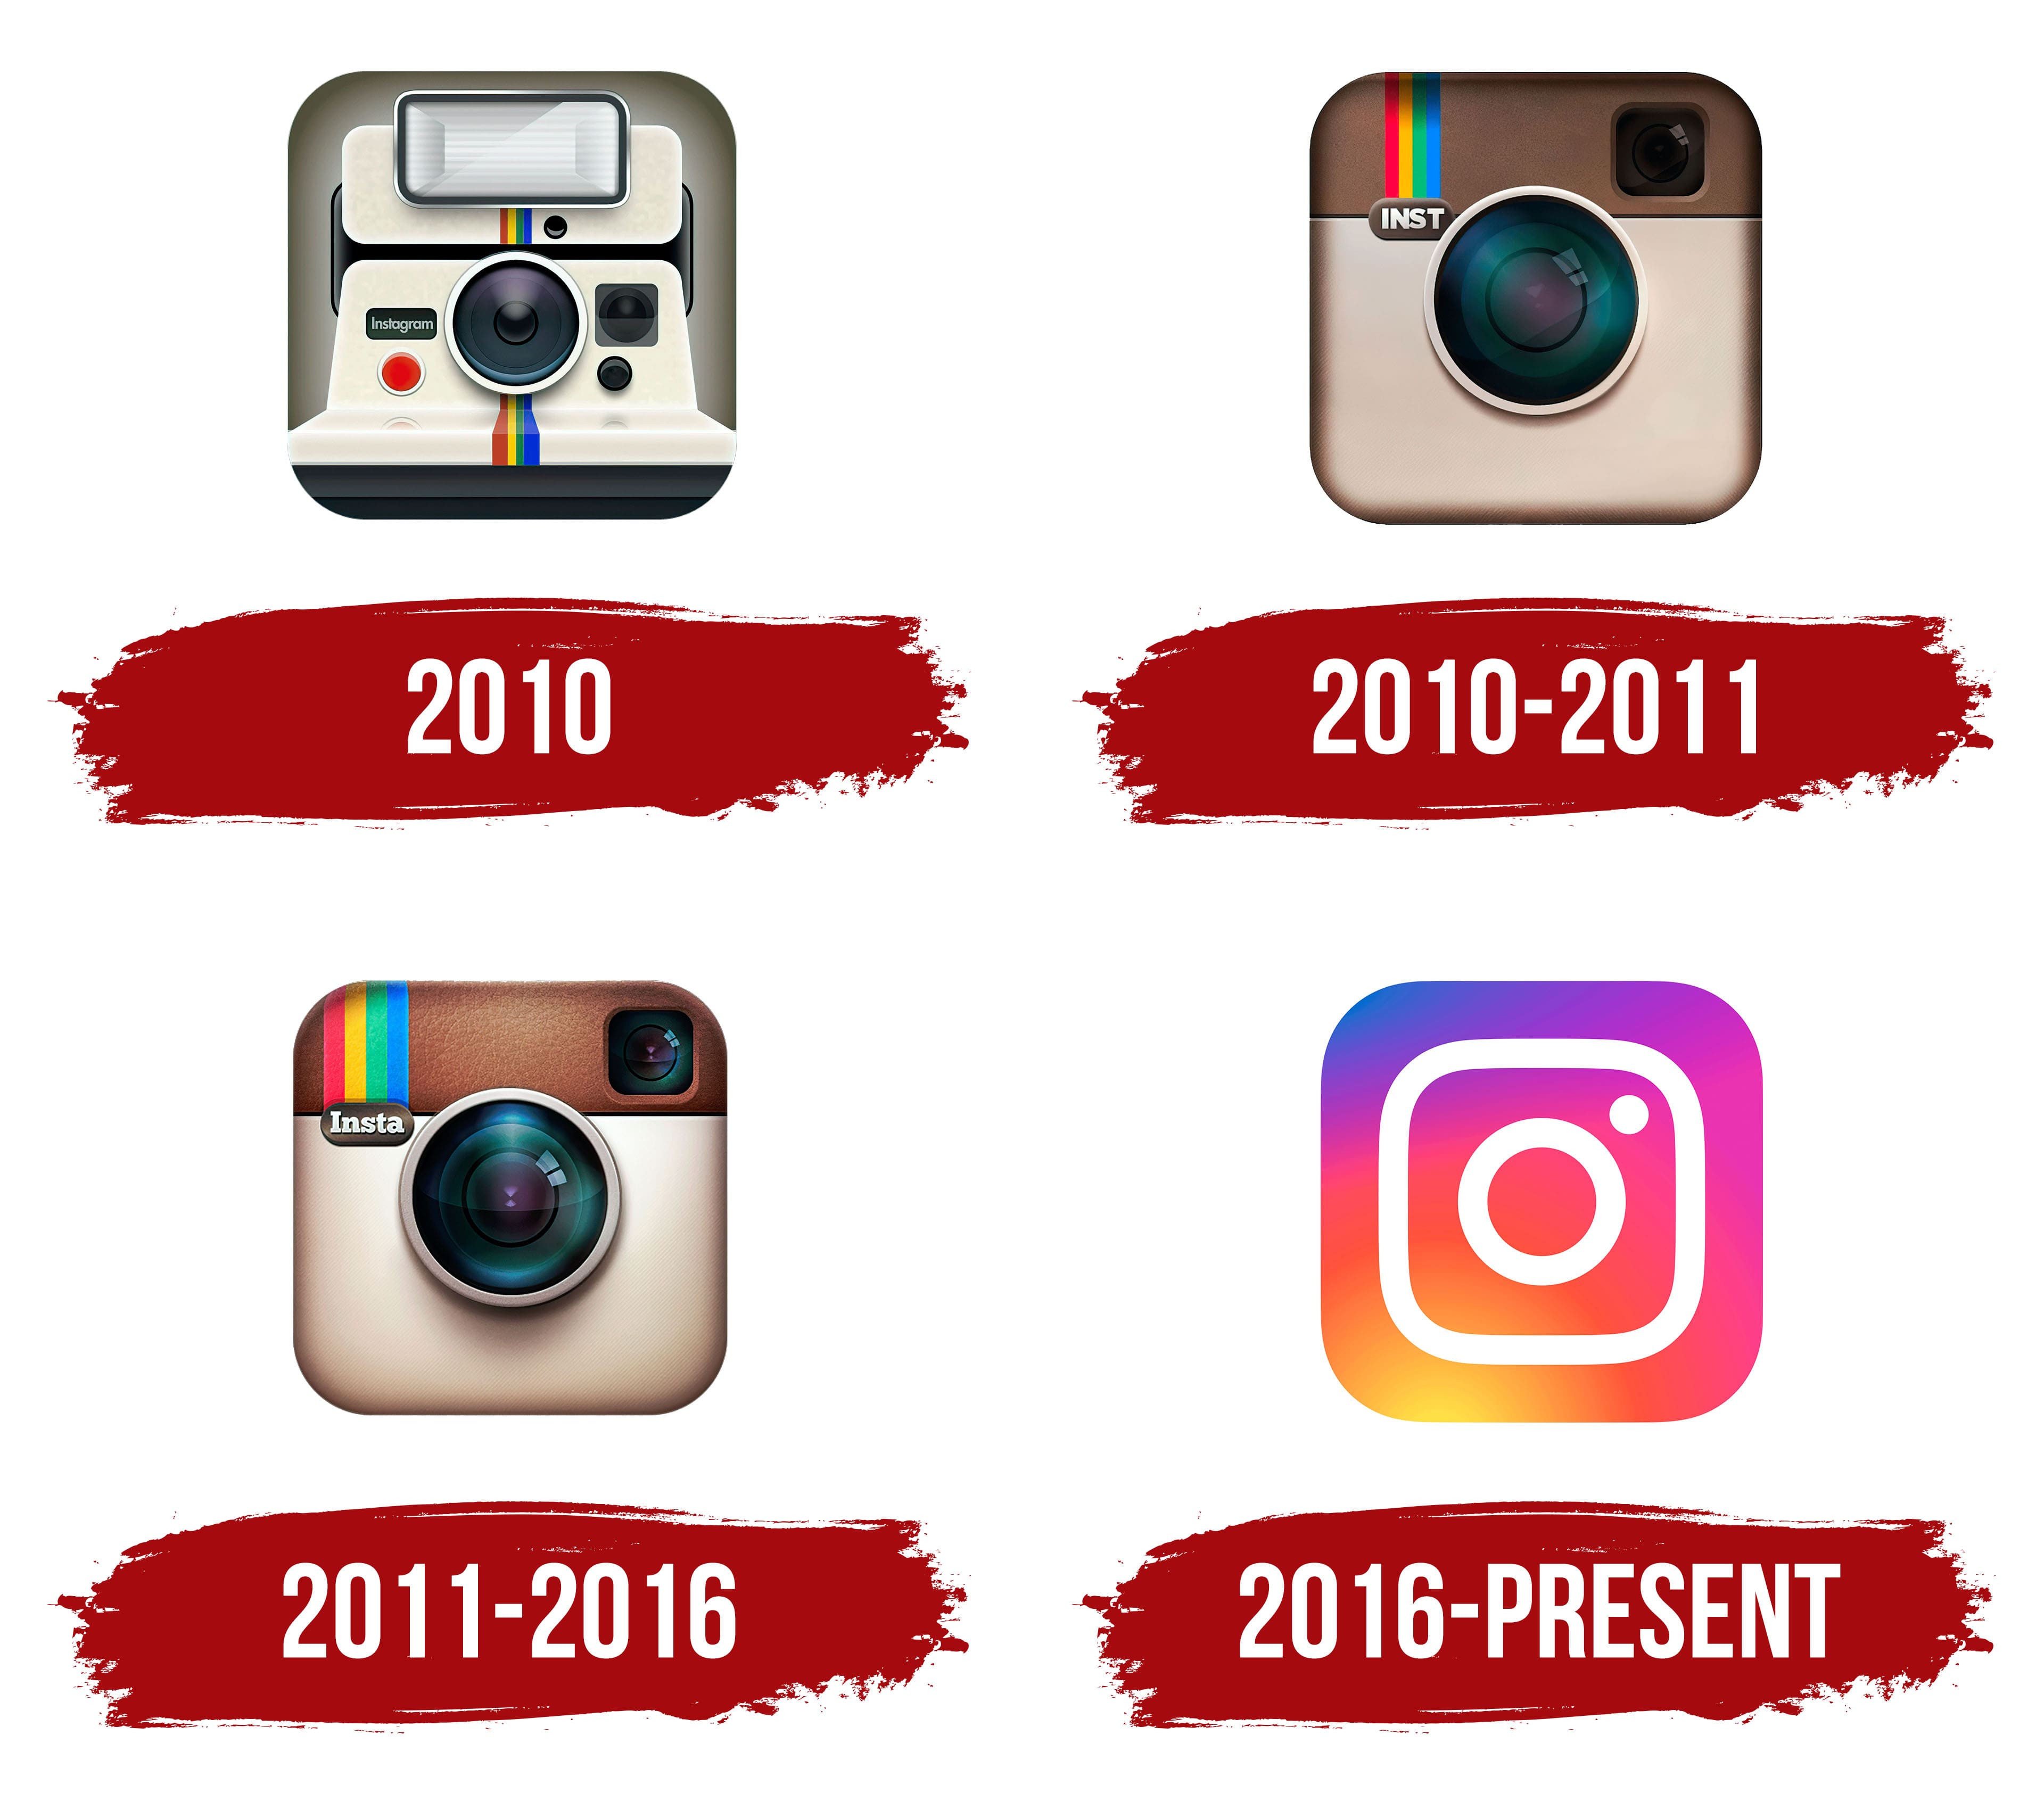 Instagram Logo and symbol, meaning, history, PNG, brand